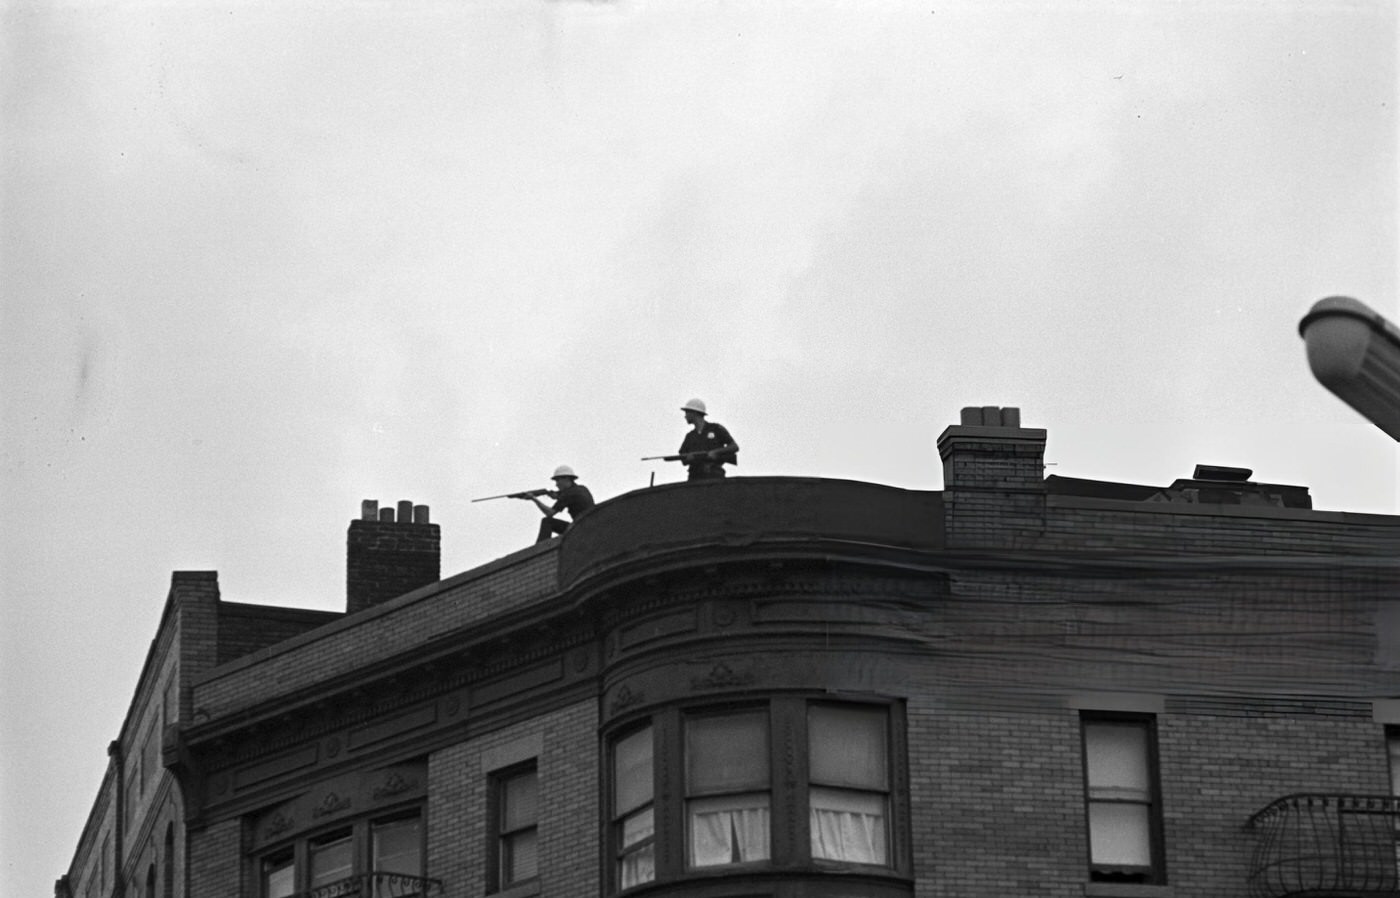 National Guard soldiers on the roof of a building overlooking the streets